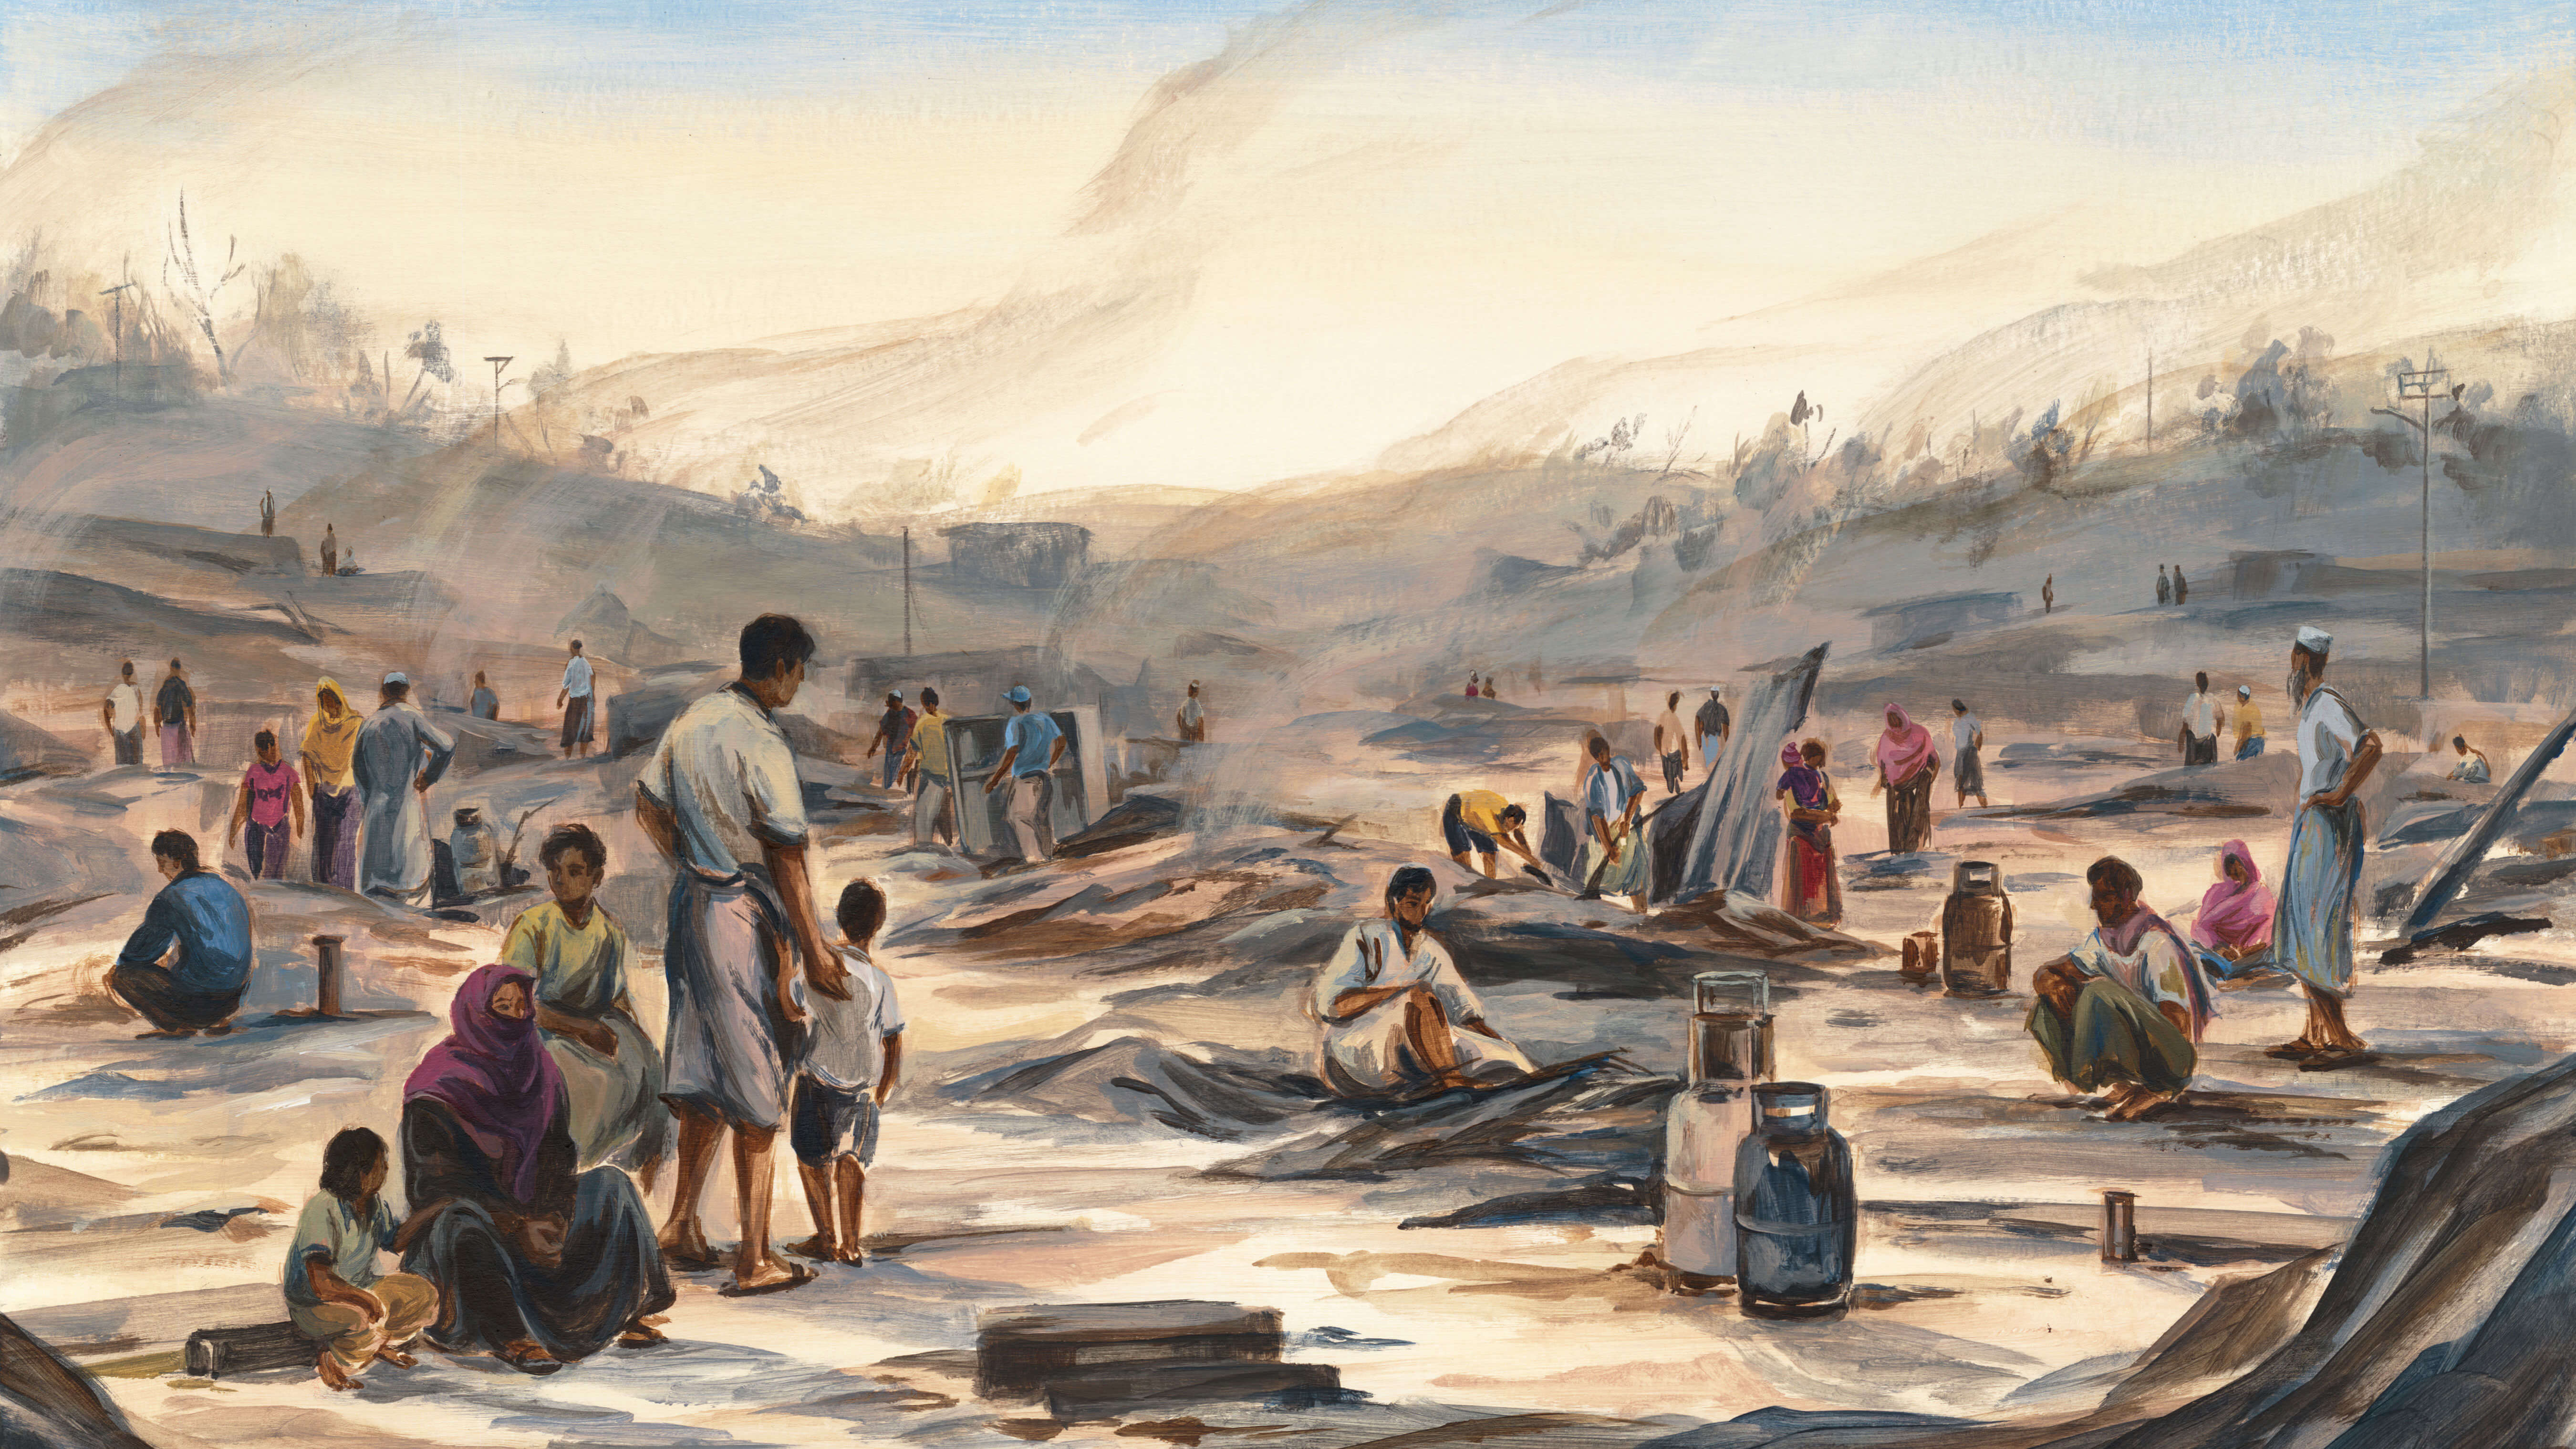 illustration of various groups of people scattered throughout a humanitarian settlement